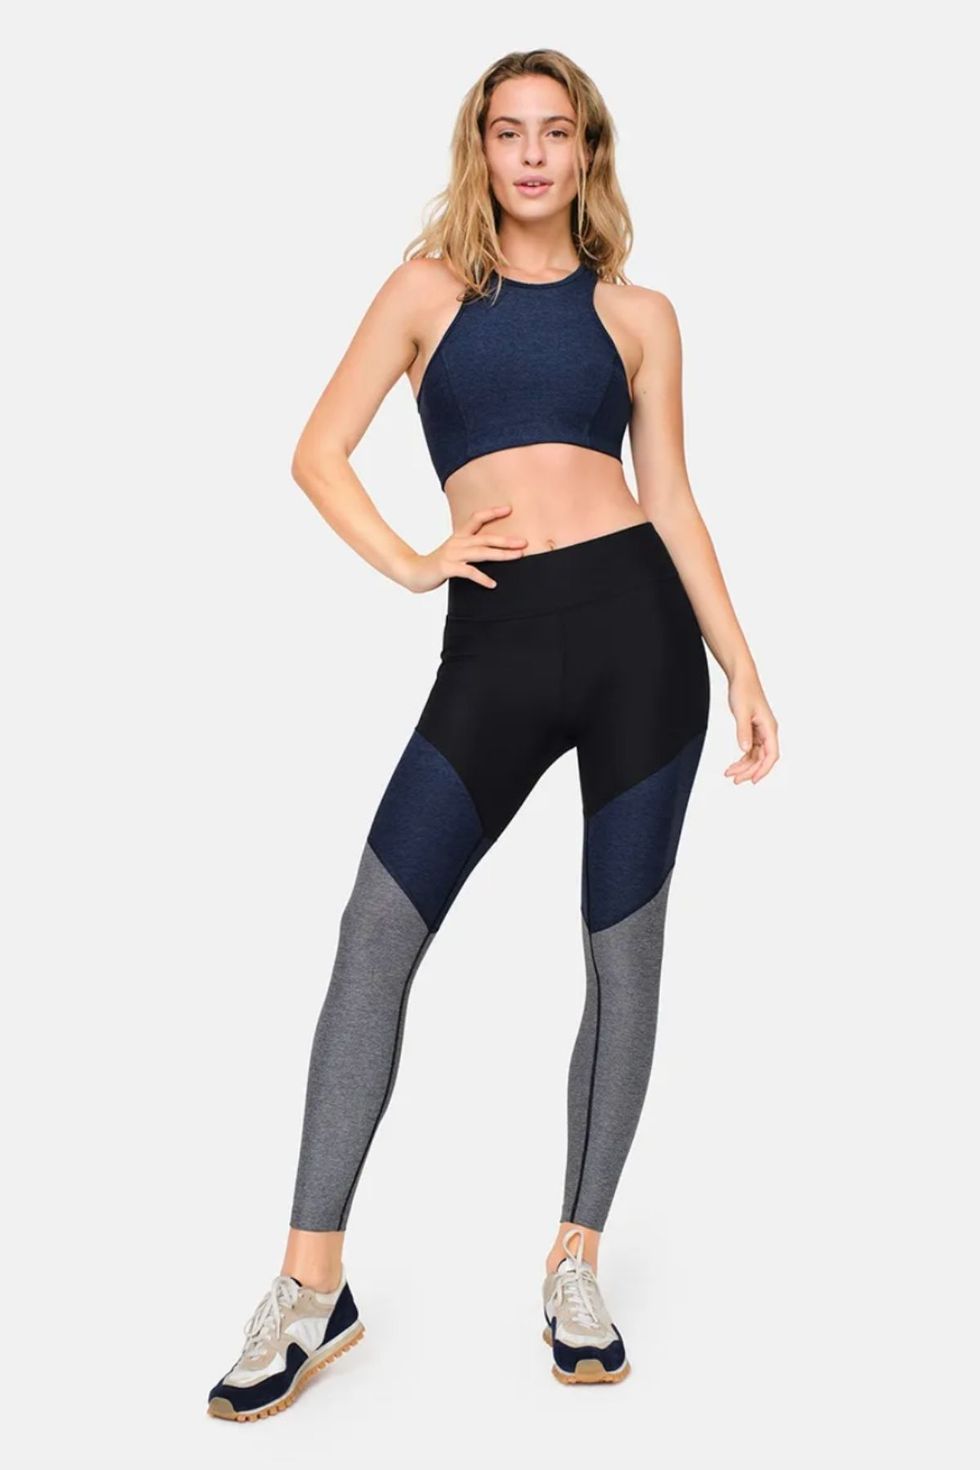 Outdoor Voices Fun Athletic Leggings for Women